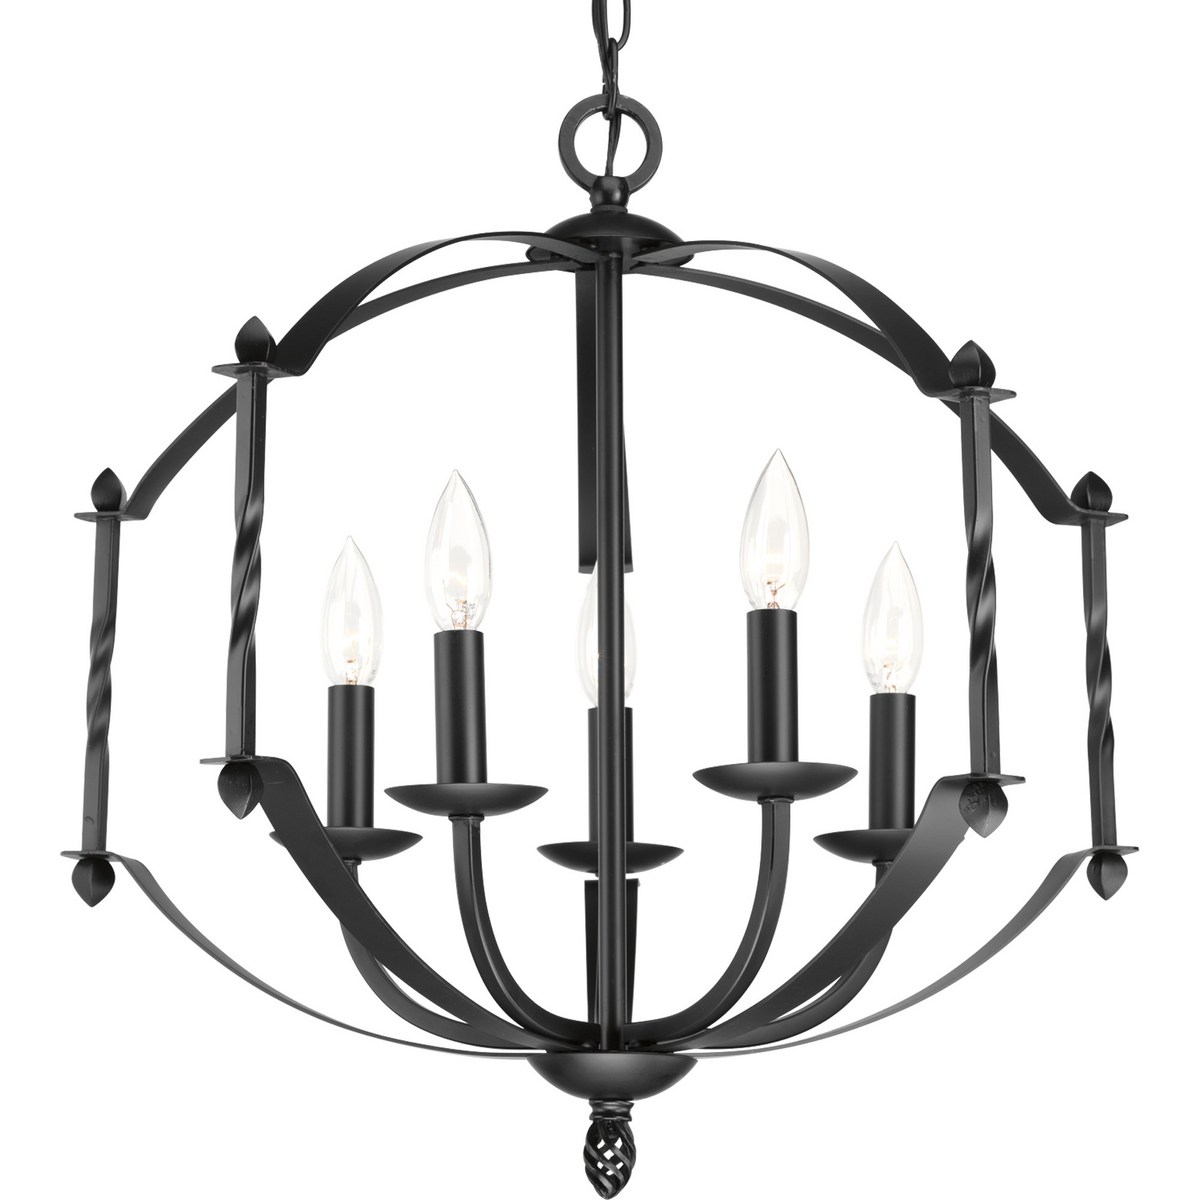 A black iron frame with twist elements takes center stage in Greyson. The five-light cluster nestles inside this rustic piece for a strong, bold, yet casual feel.